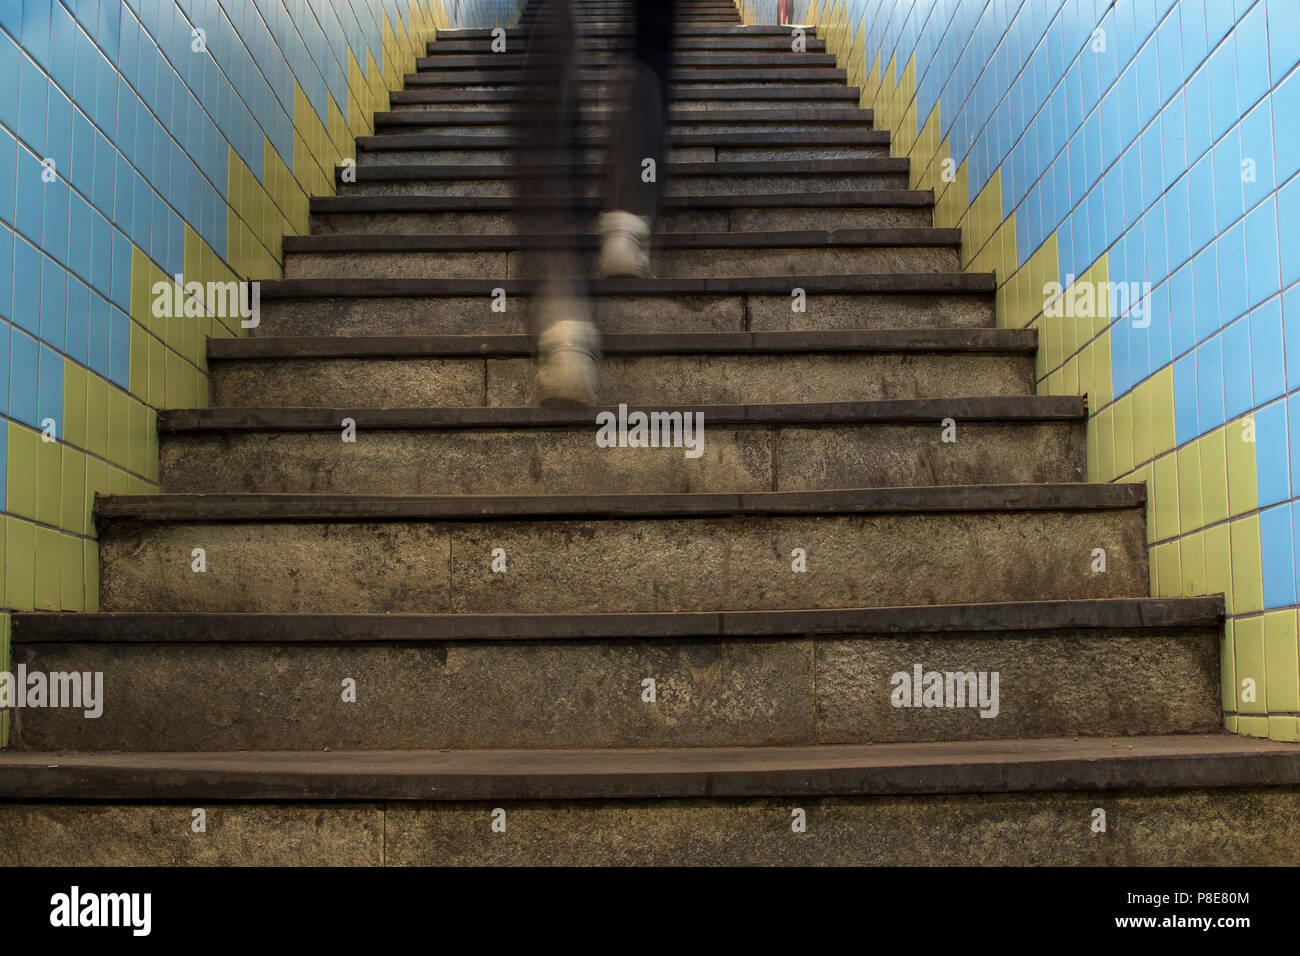 Legs in motion blur running up stairs in subway station. Stock Photo